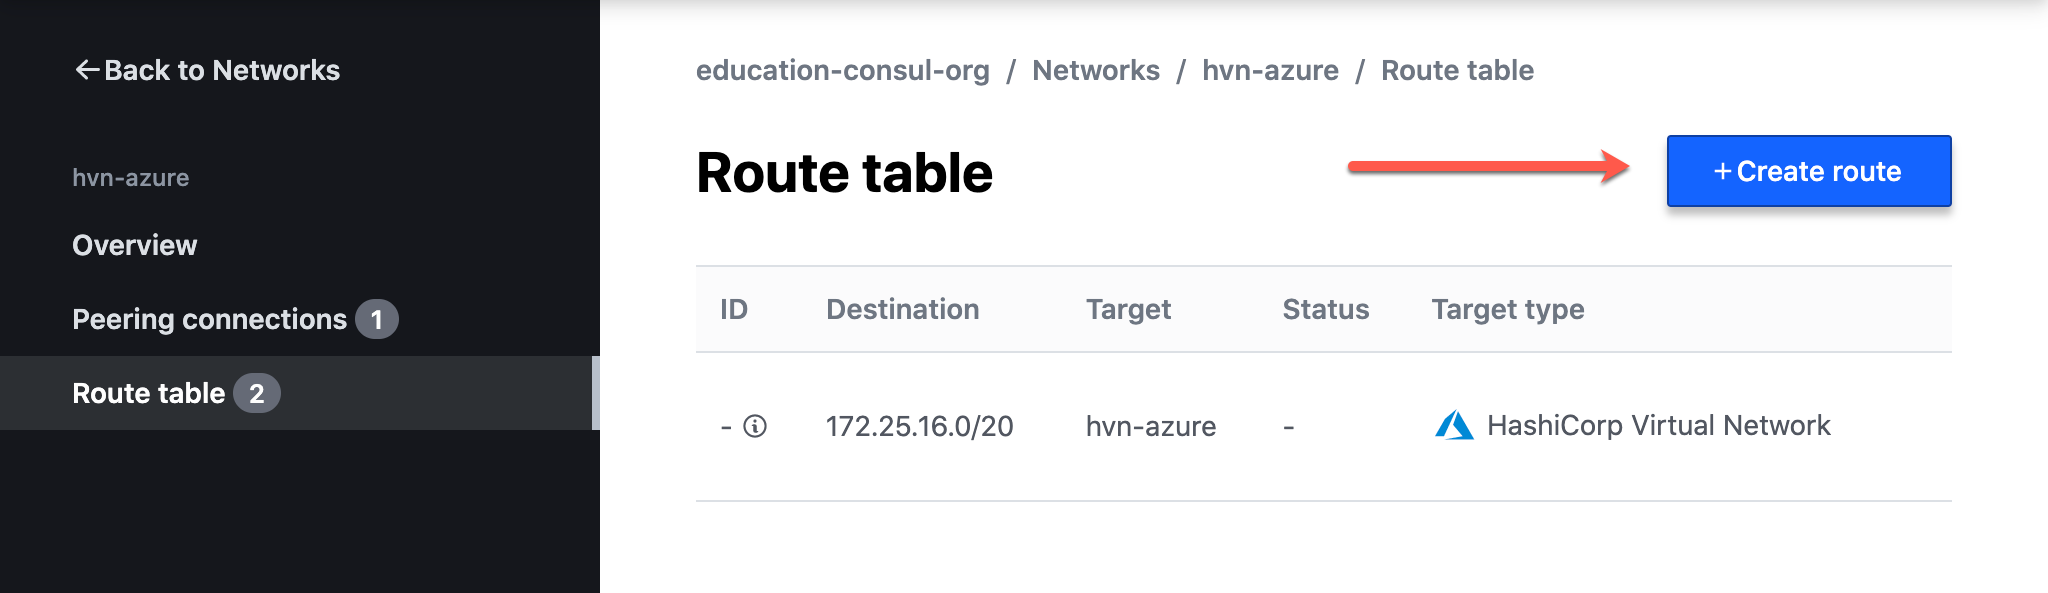 HVN Peering Connection details view with an arrow pointing to the "Create route" button